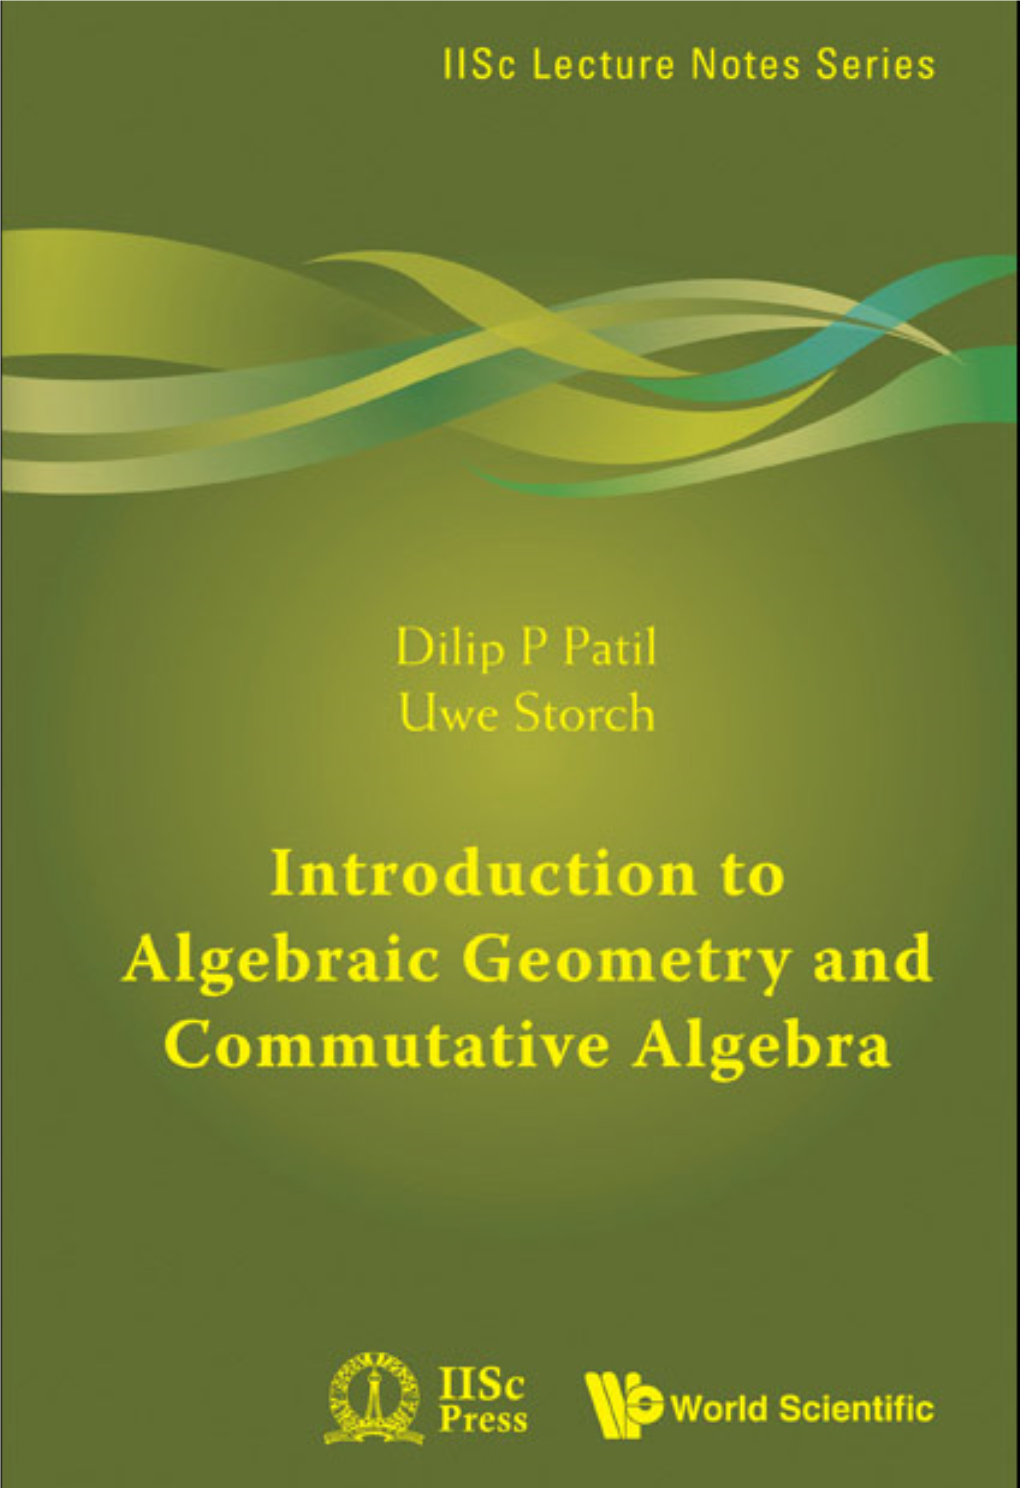 Introduction to Algebraic Geometry and Commutative Algebra (219 Pages)